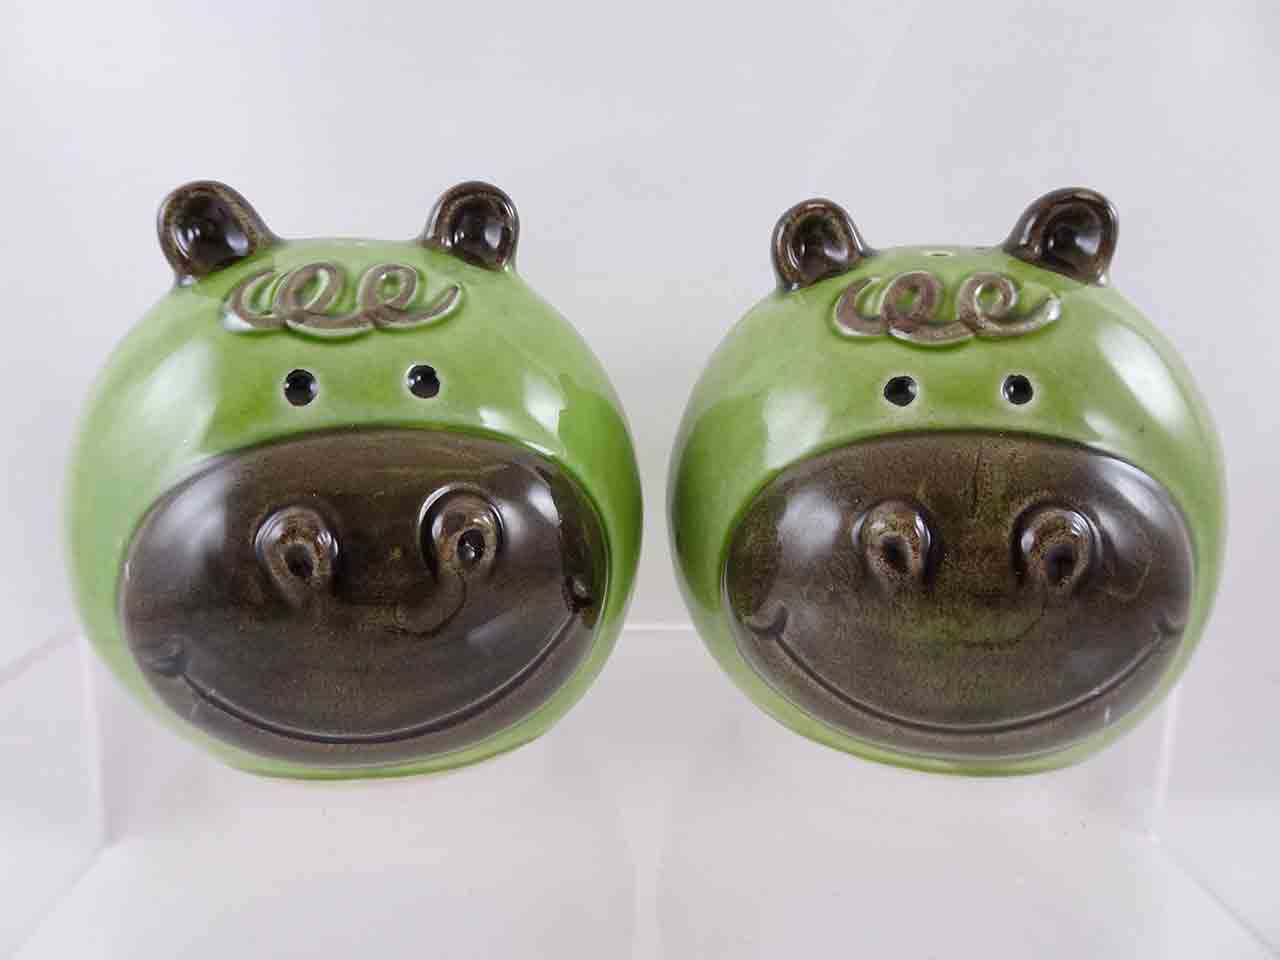 Japan big round animal heads salt and pepper shakers - cows